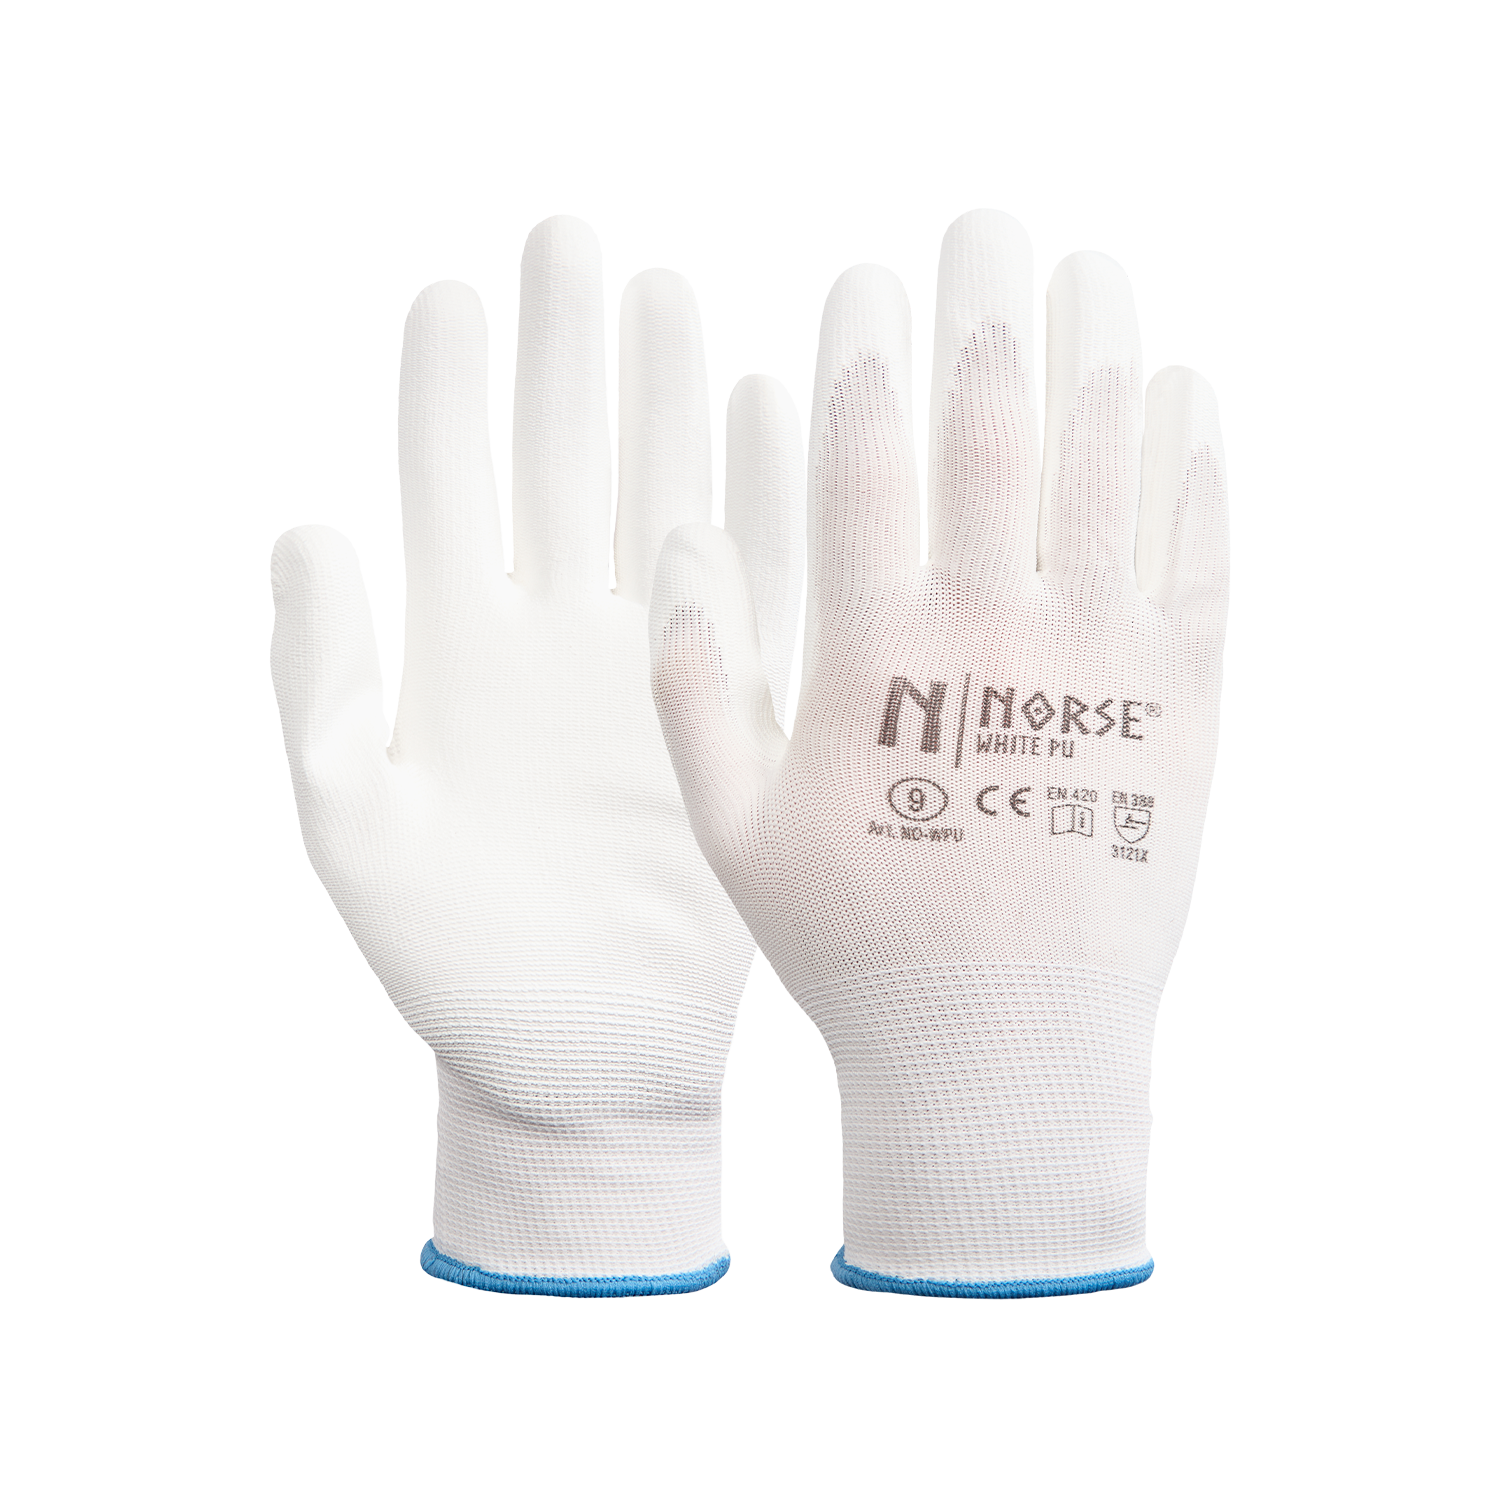 NORSE PU White assembly gloves size 9